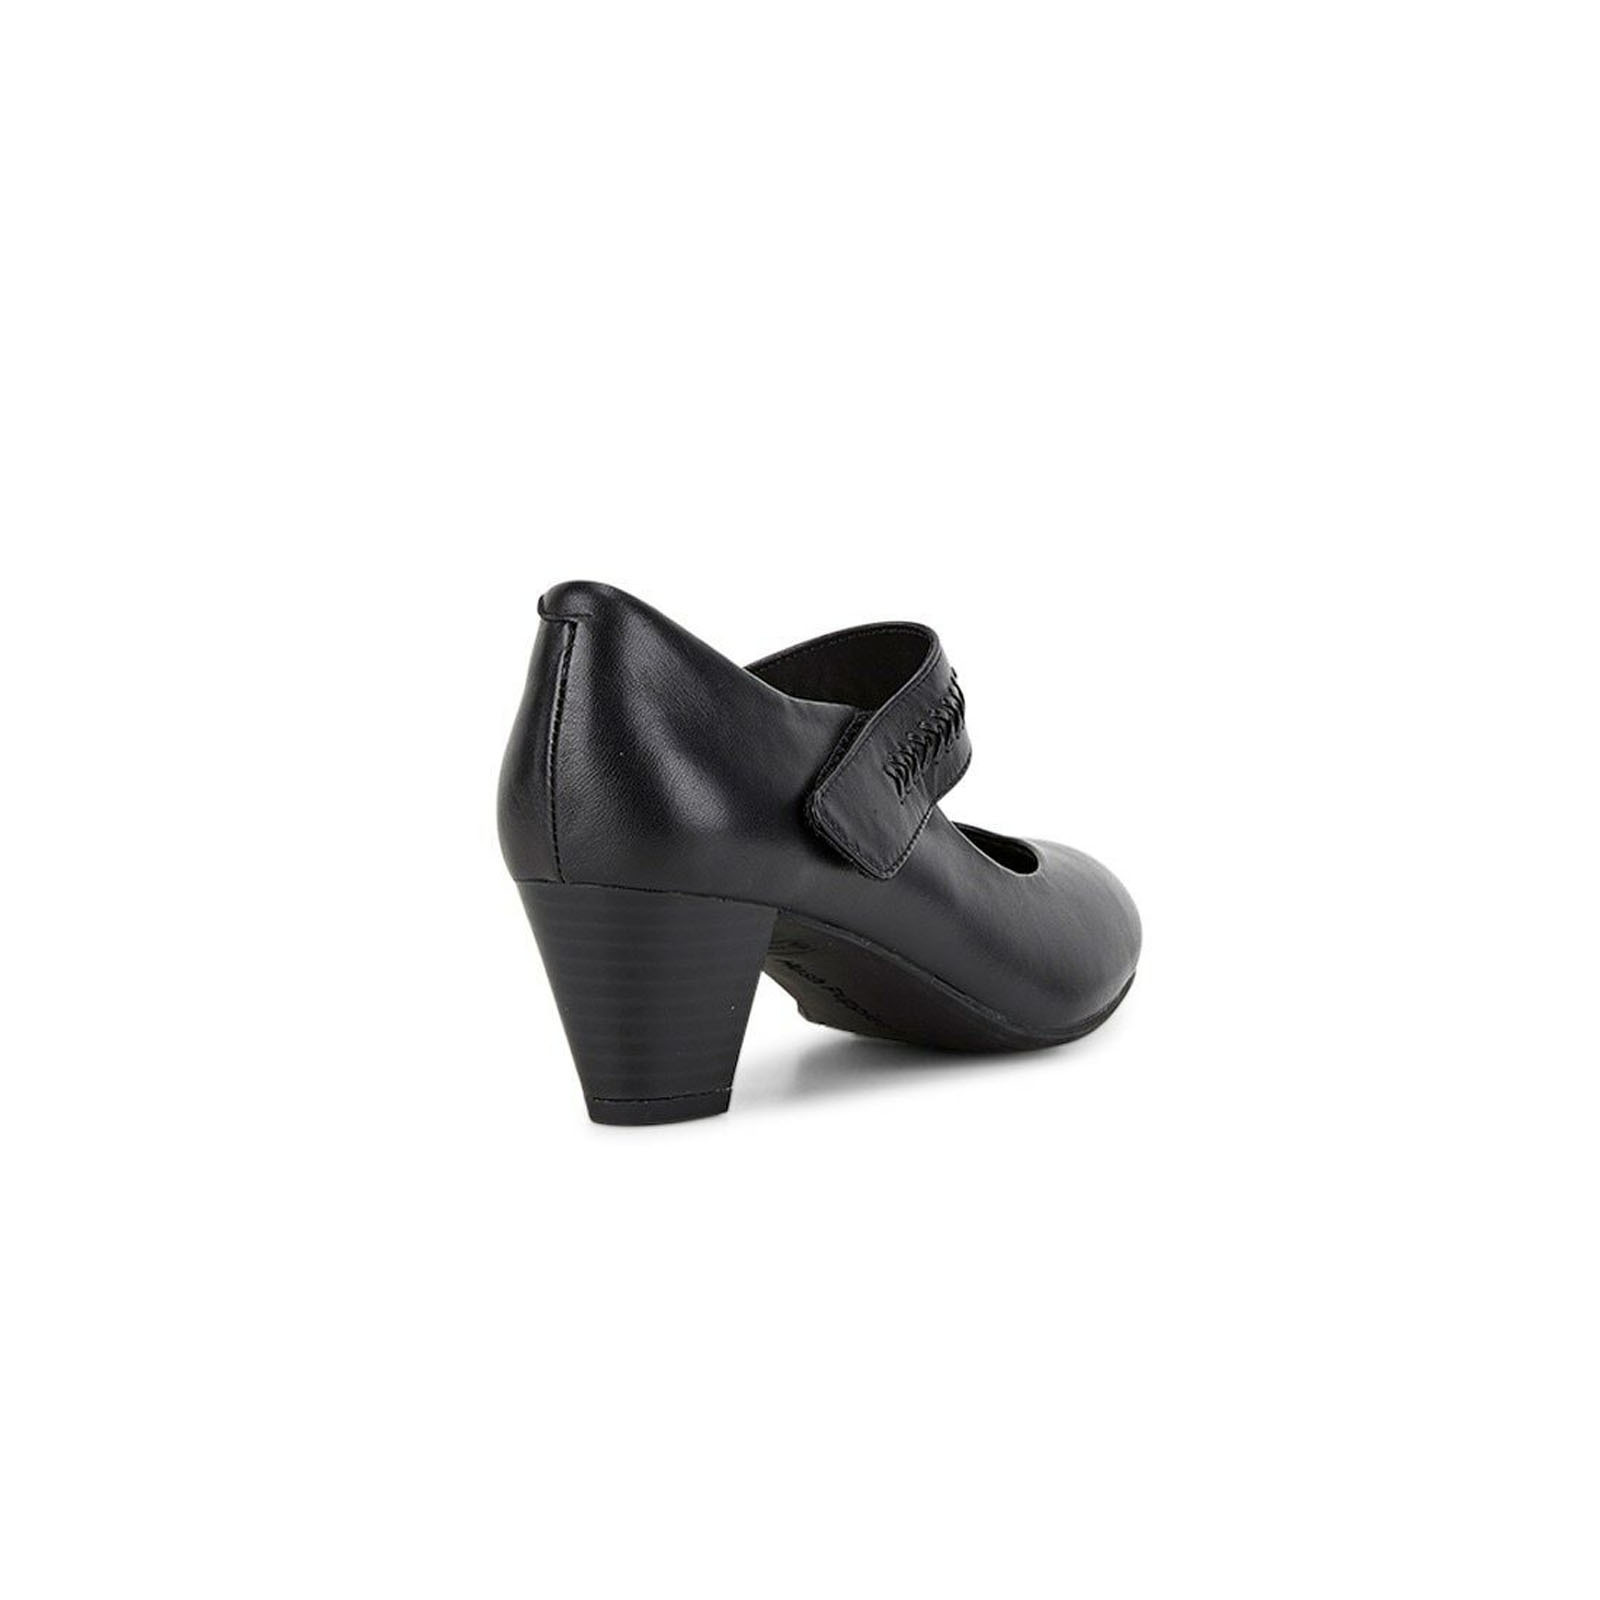 HUSH PUPPIES Womens Shoes | The One Bar Leather Shoes In Black - Leeds  Developers